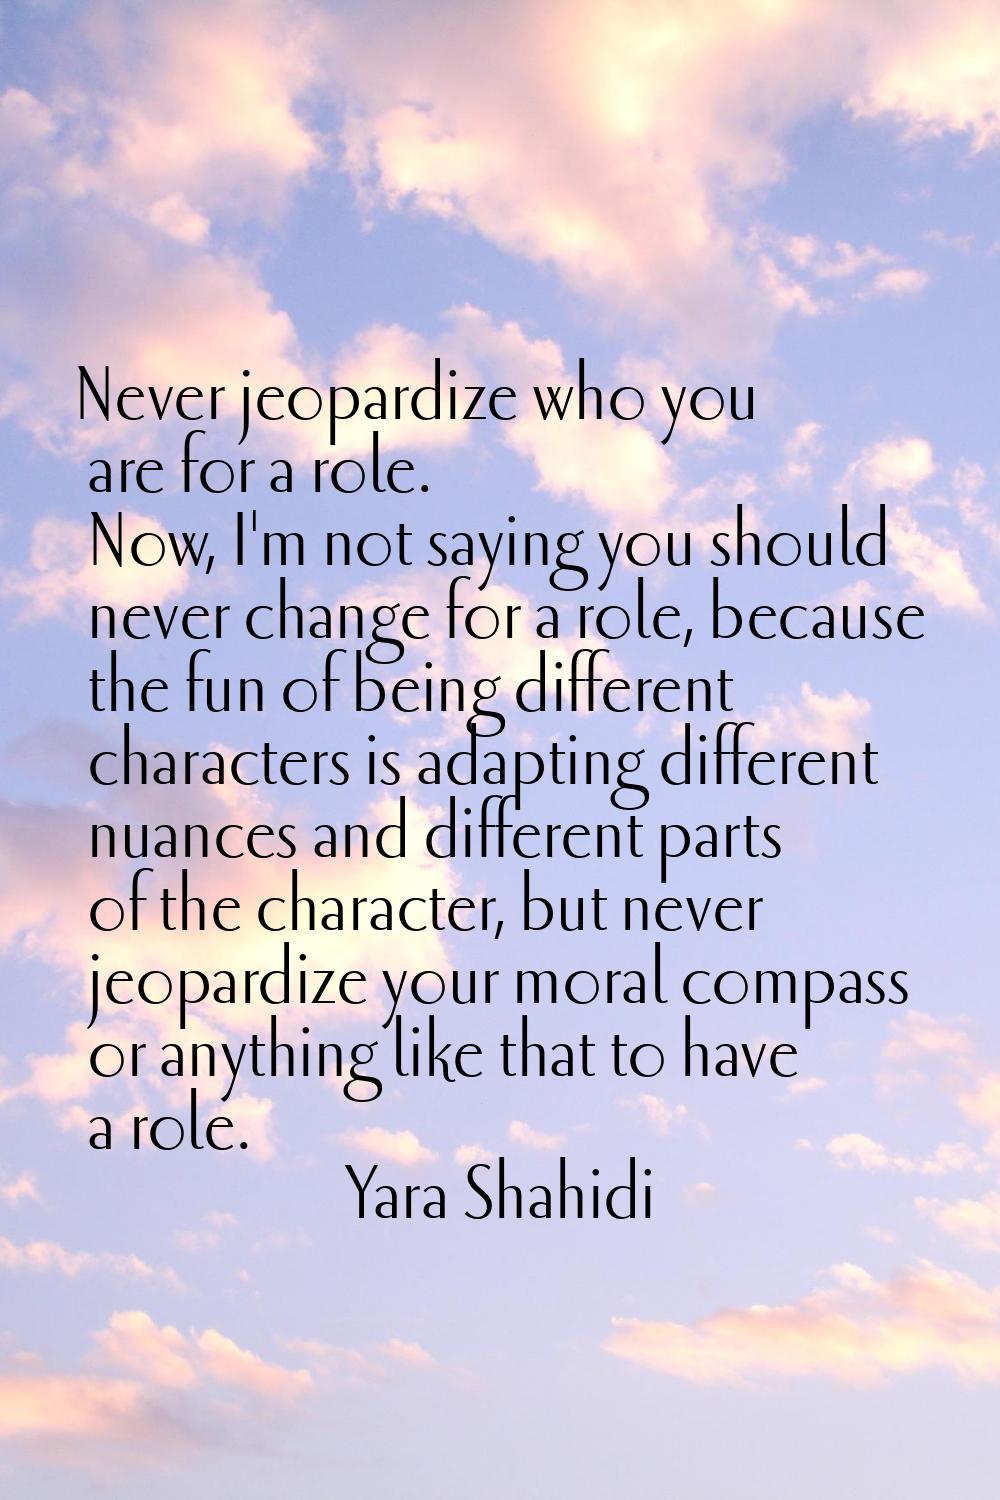 Never jeopardize who you are for a role. Now, I'm not saying you should never change for a role, be